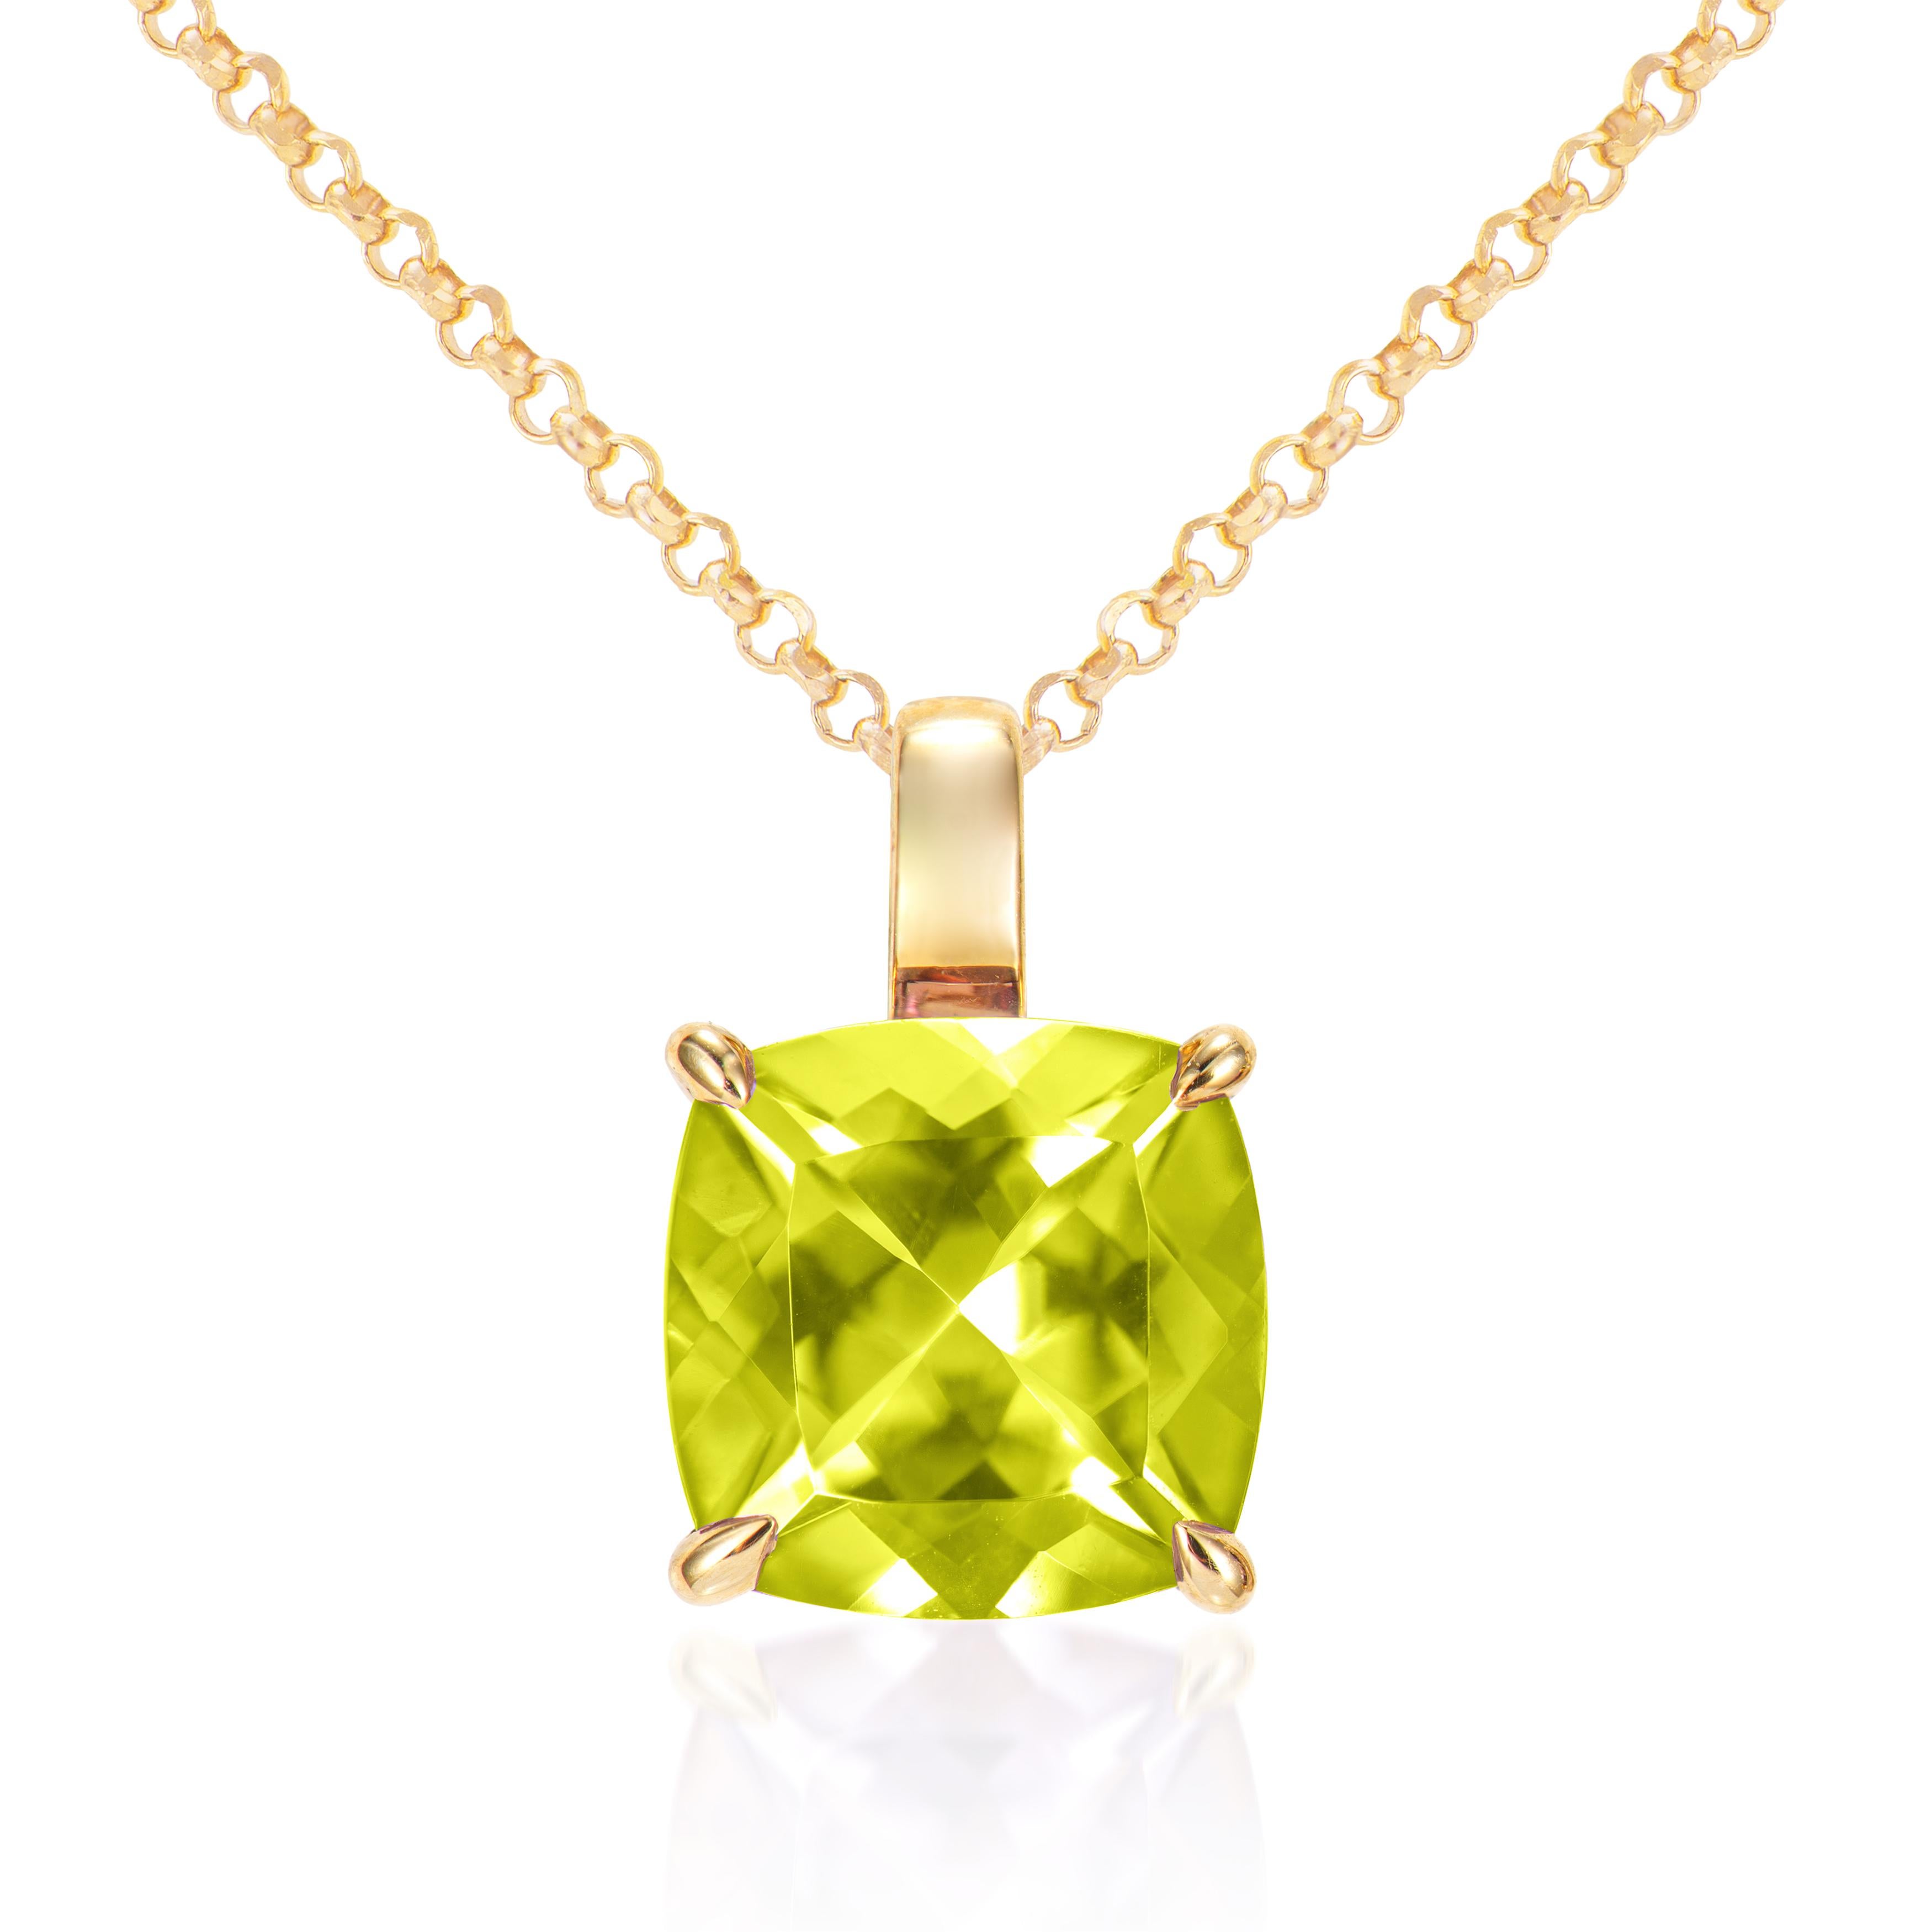 Presented A lovely collection of gems, including Peridot Amethyst, Sky Blue Topaz and Swiss Blue Topaz is perfect for people who value quality and want to wear it to any occasion or celebration. The yellow gold Peridot pendant offer a classic yet